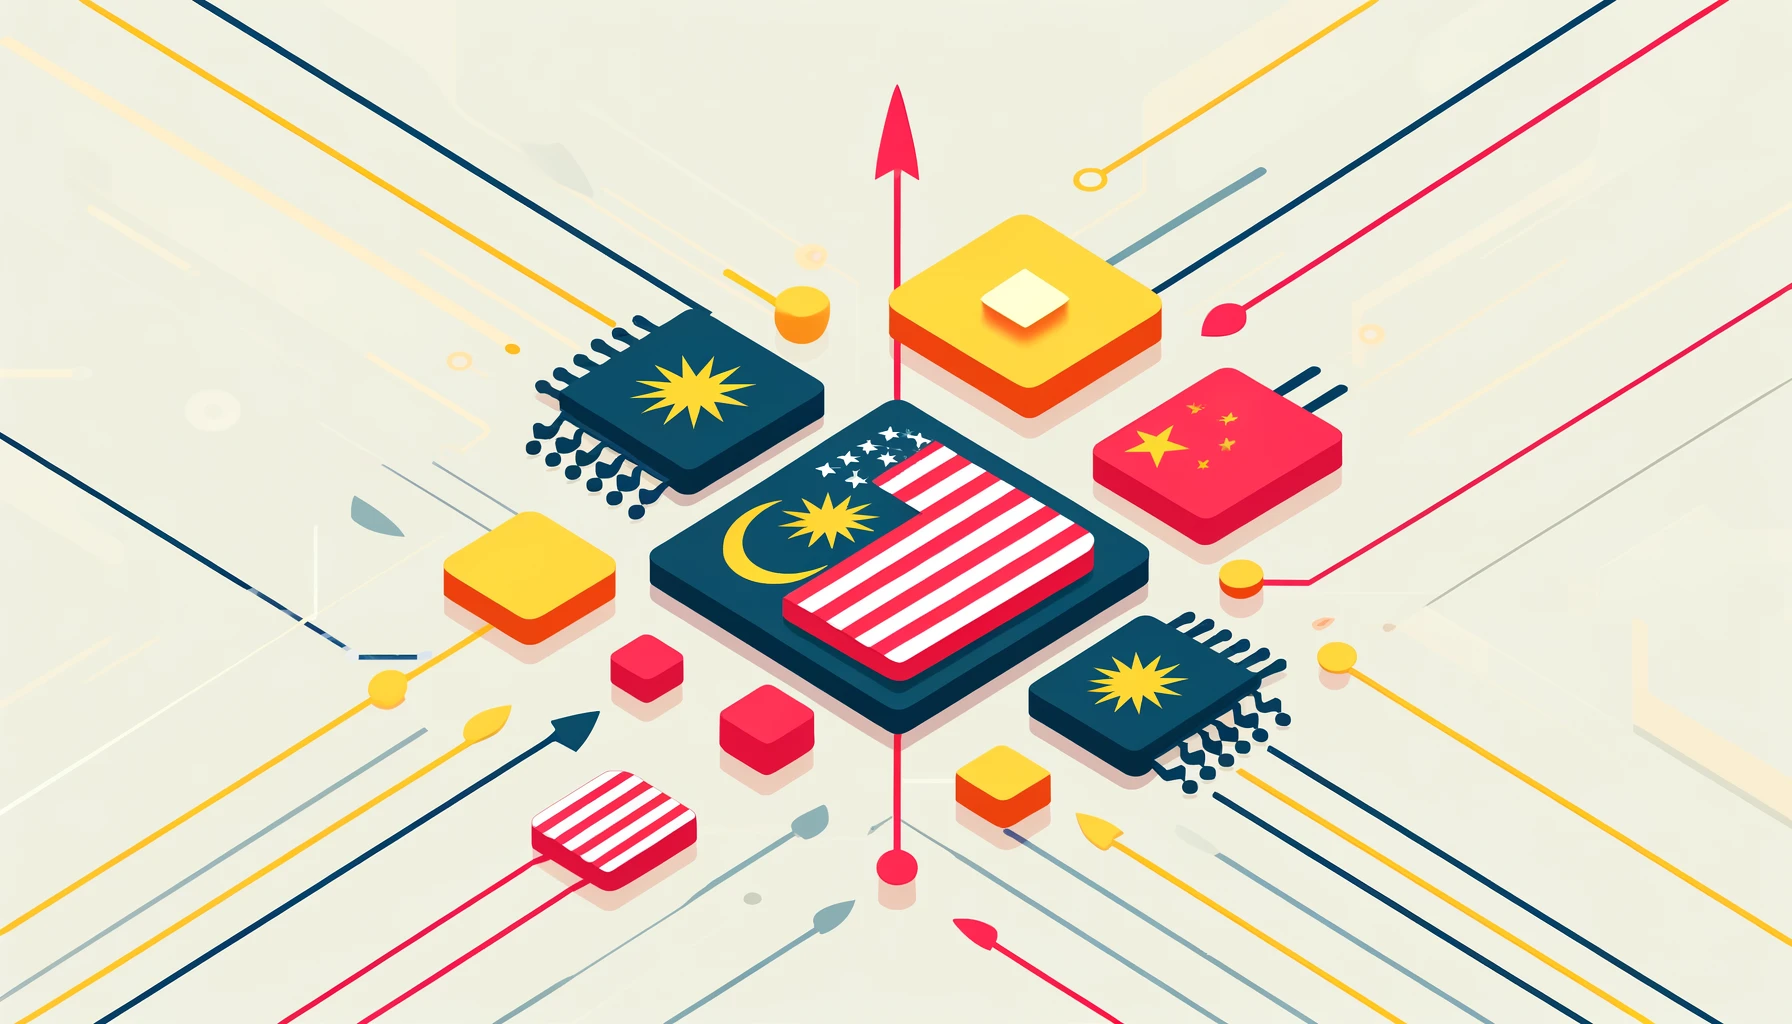 Malaysia becoming a key player in the semiconductor industry amidst US-China tensions.